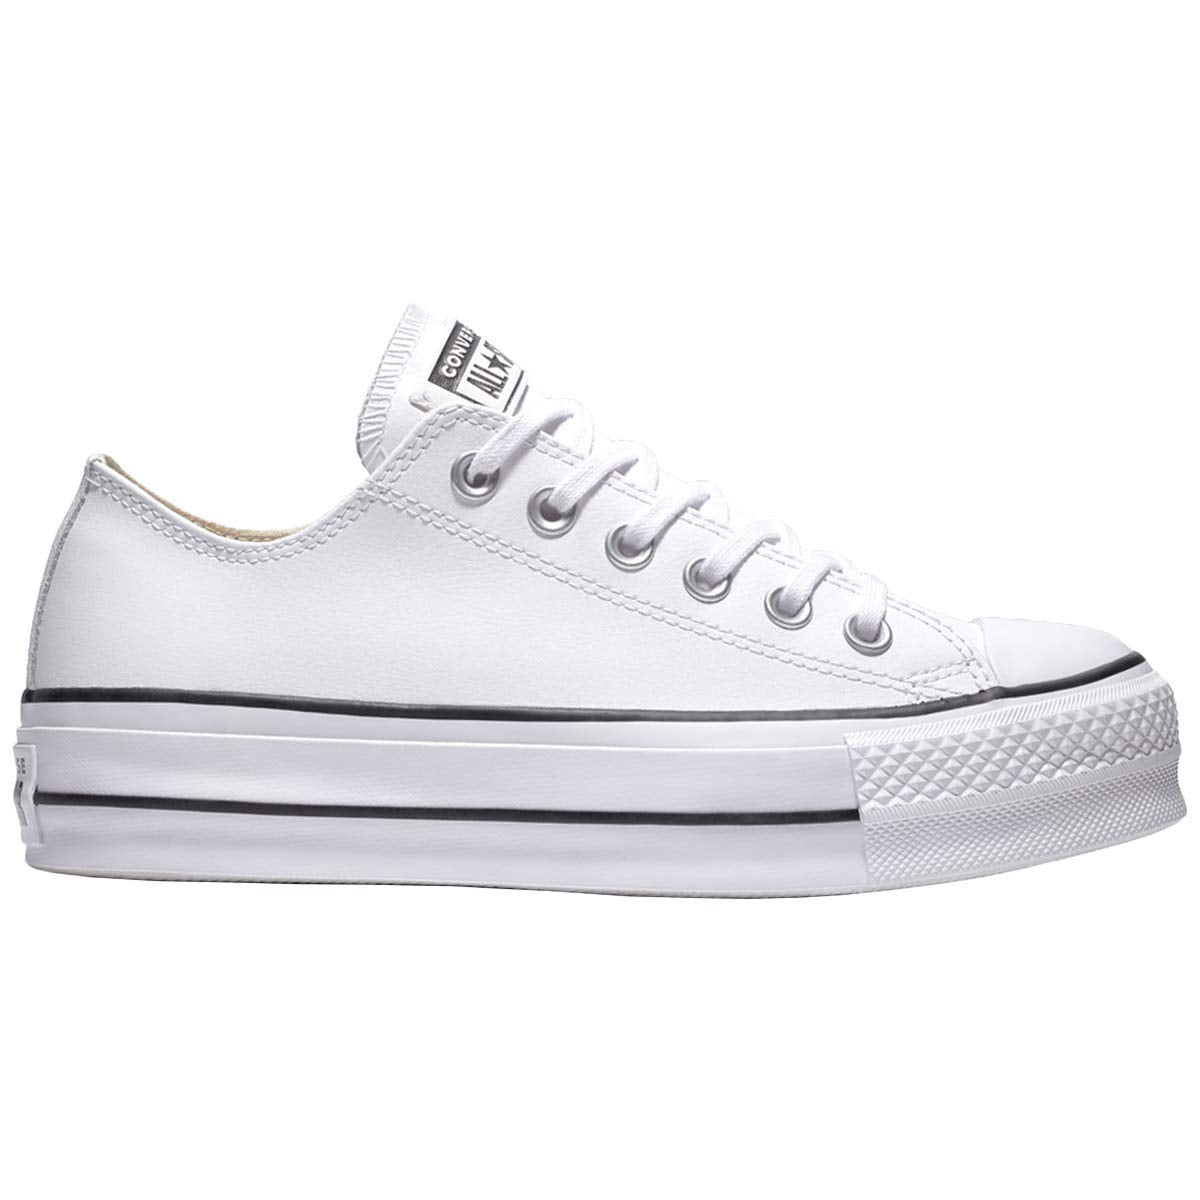 converse white chuck taylor all star lift platform sneakers